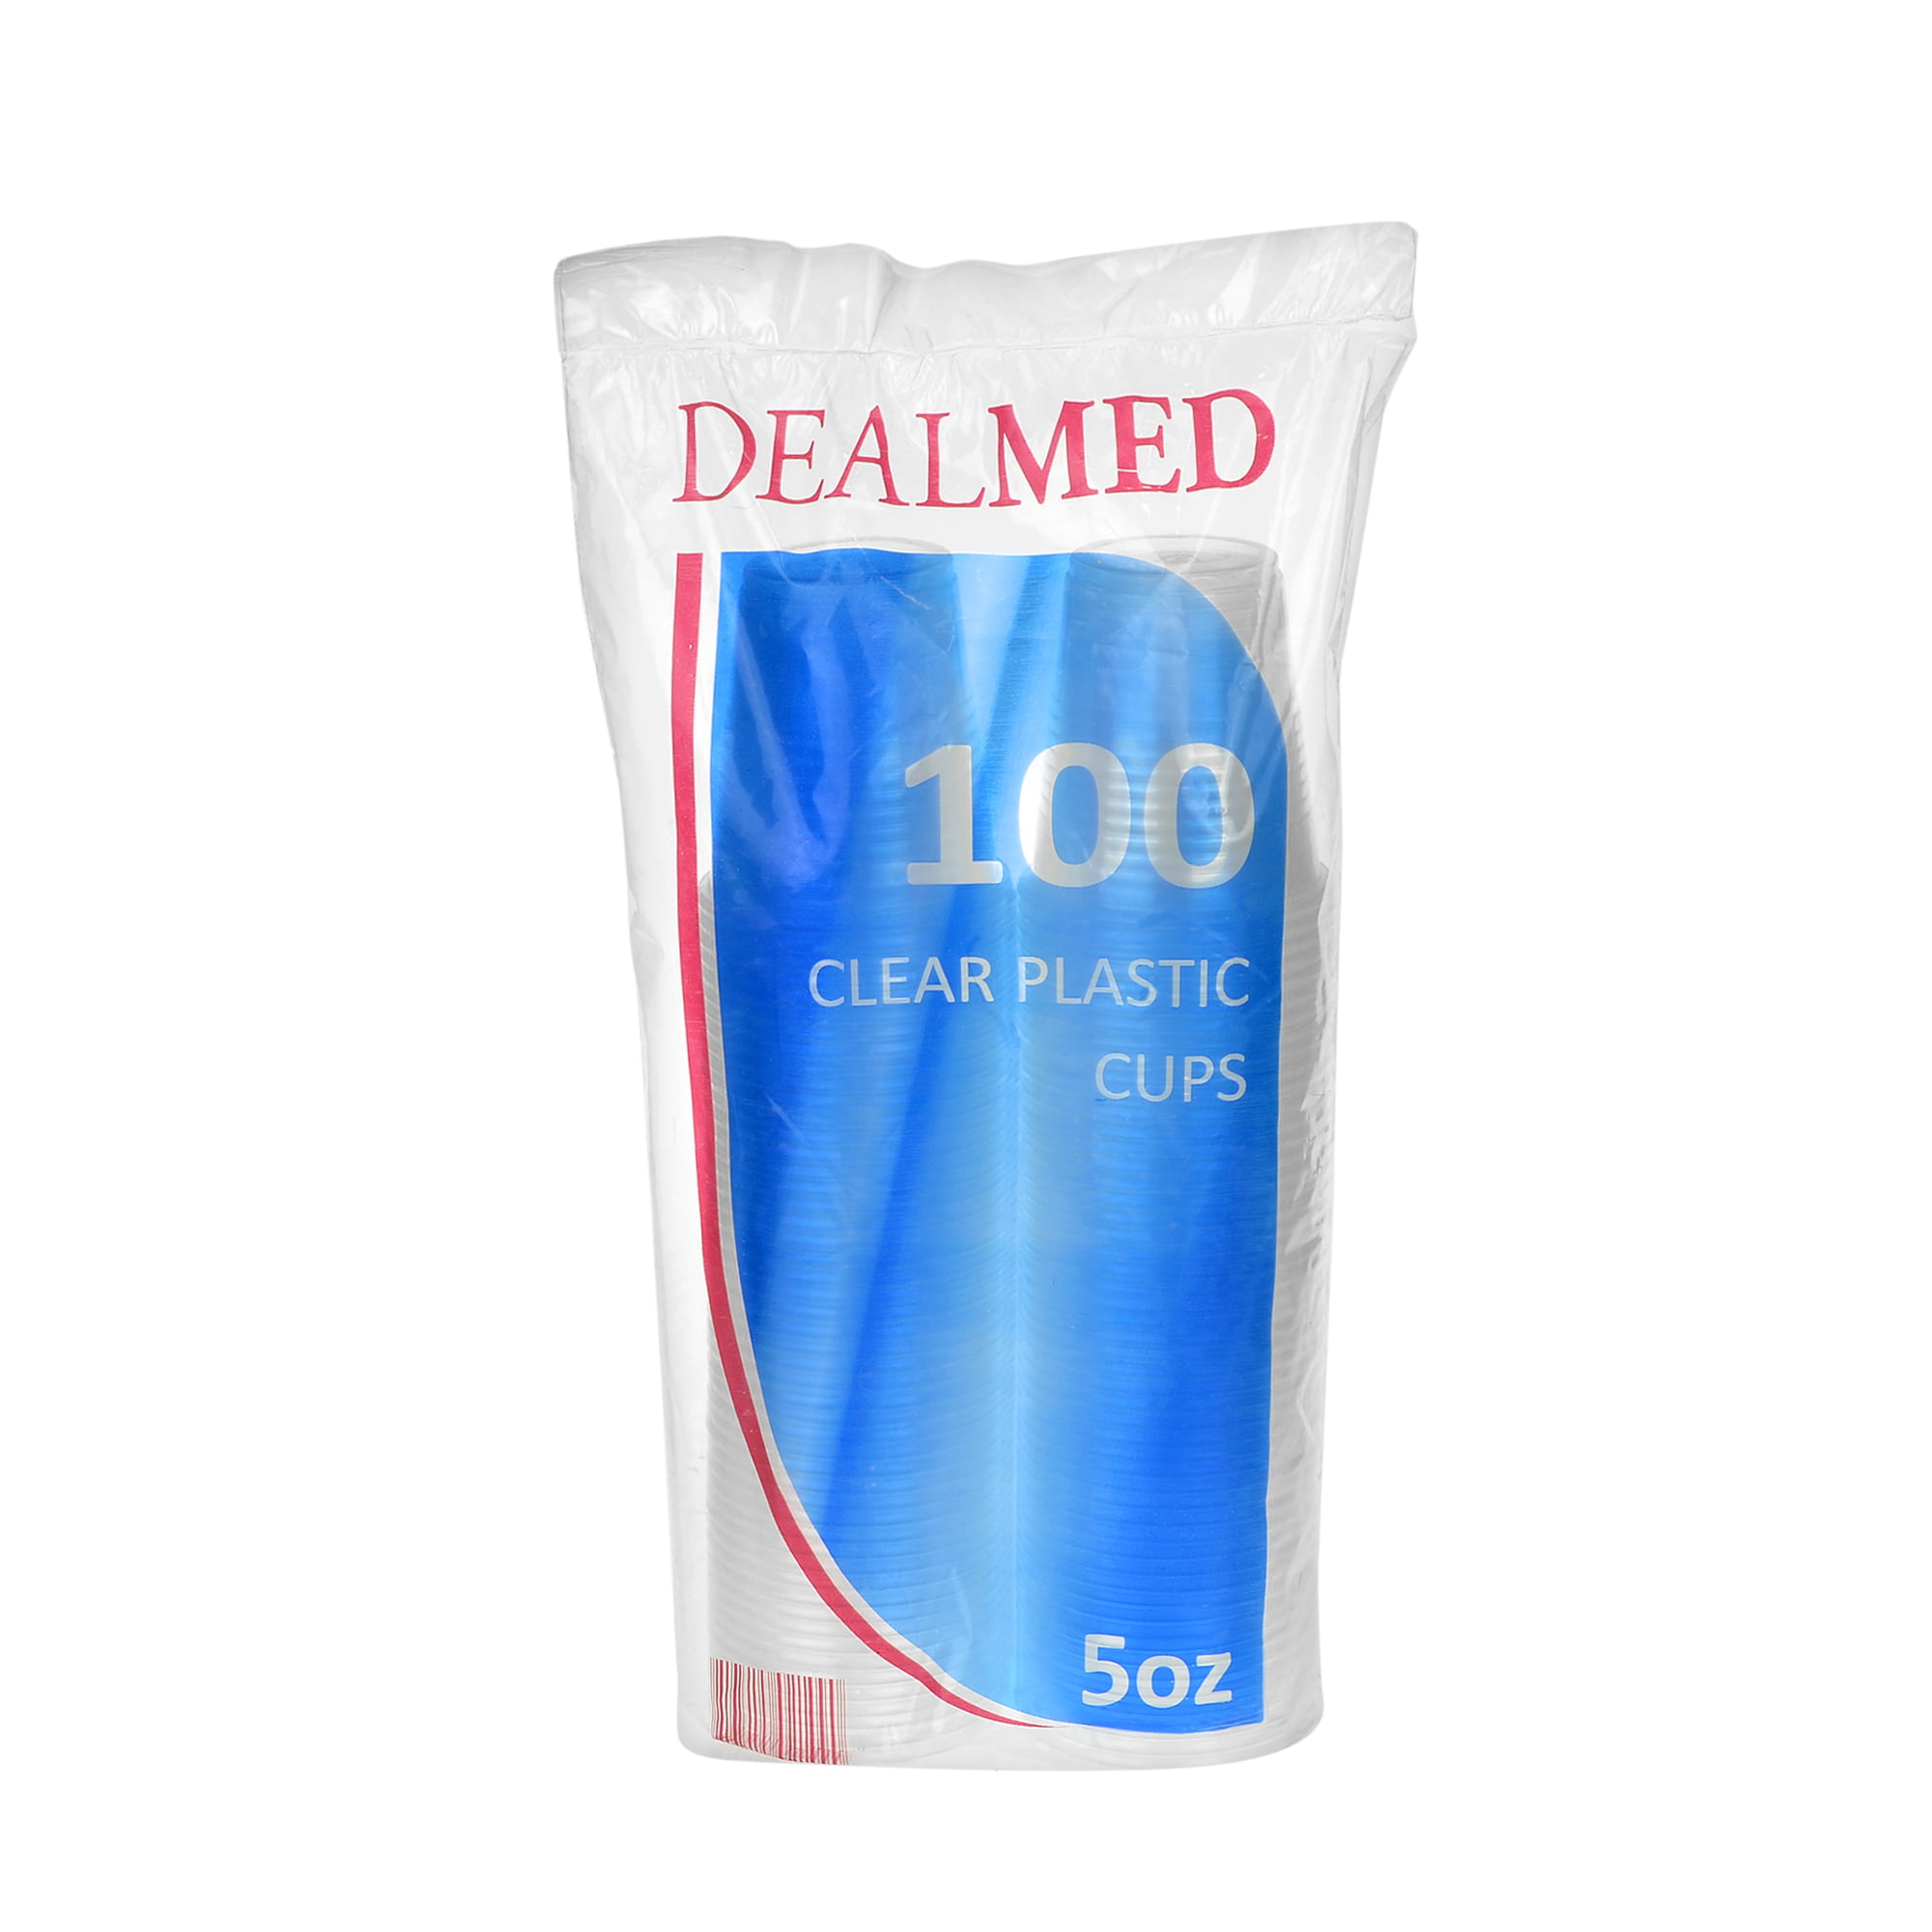 100% Recyclable Cups 3 oz Disposable Cups at Home and More Hospitals Ideal for Doctor's Offices School Nurse's Dealmed Disposable Plastic Cups – 100 Clear Cups 